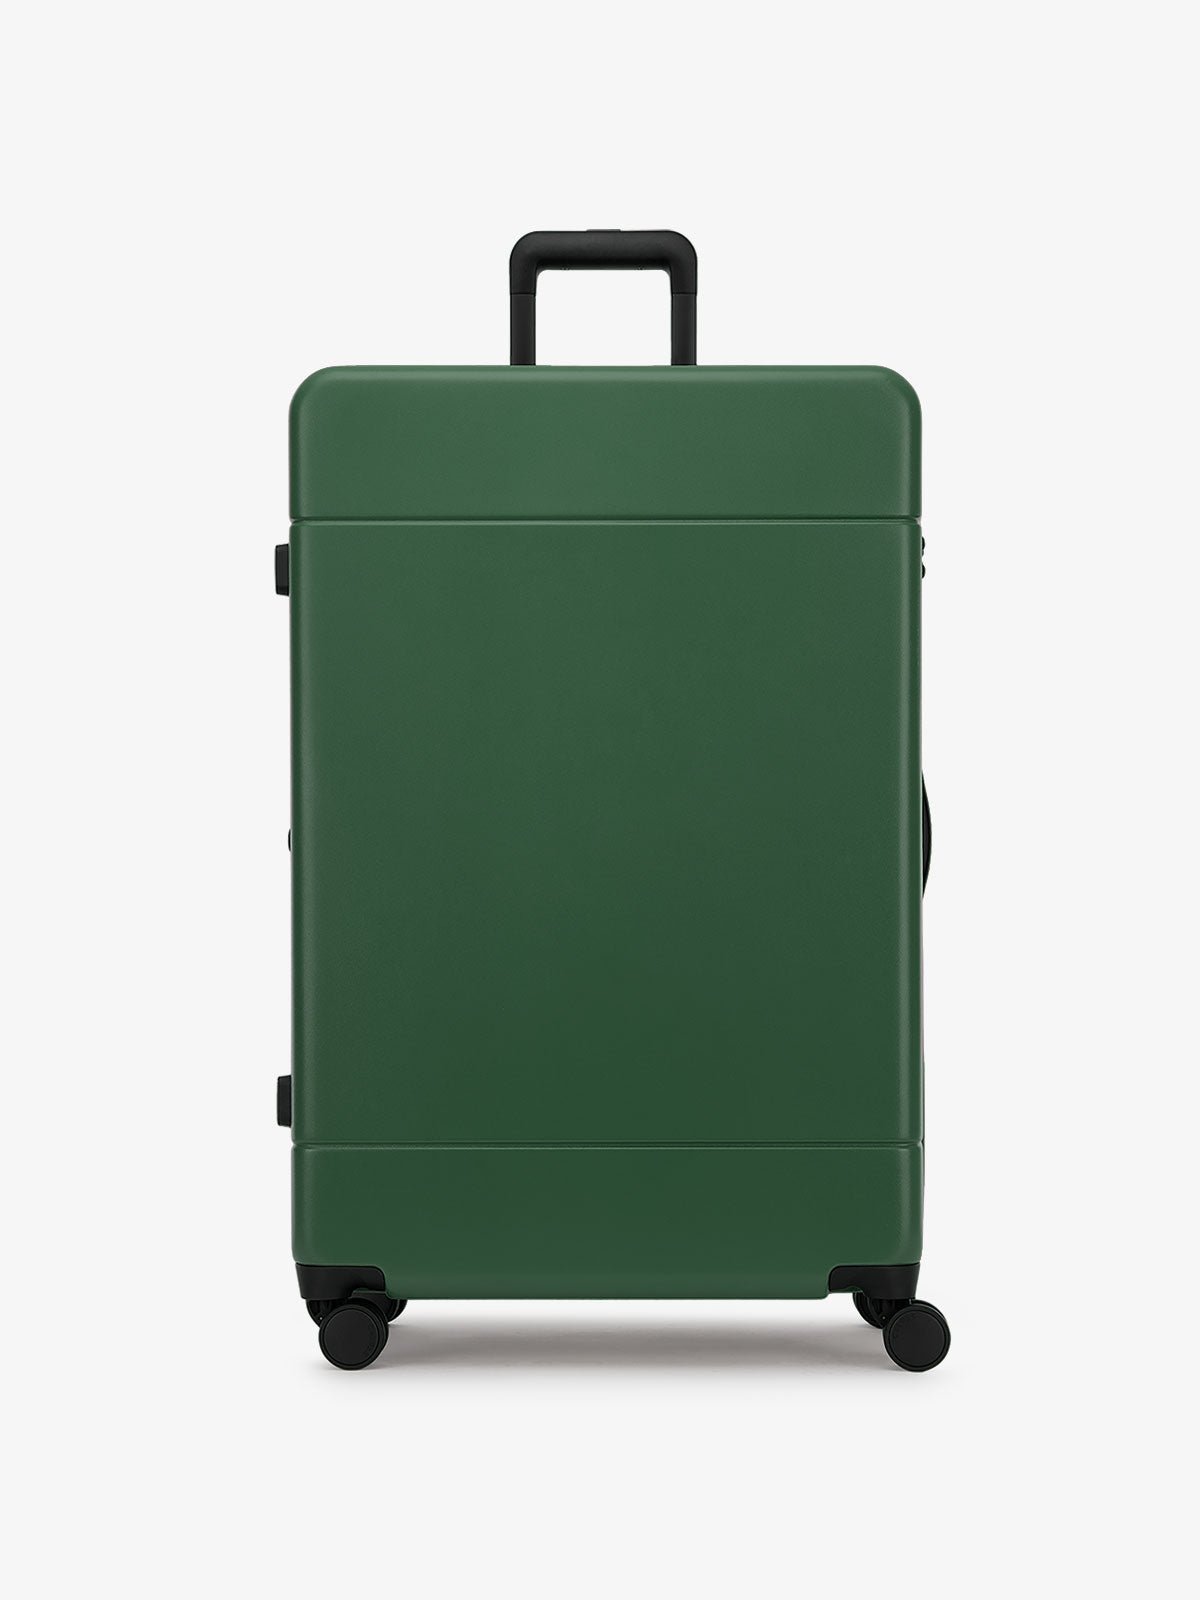 large 30 inch hard shell luggage in green emerald